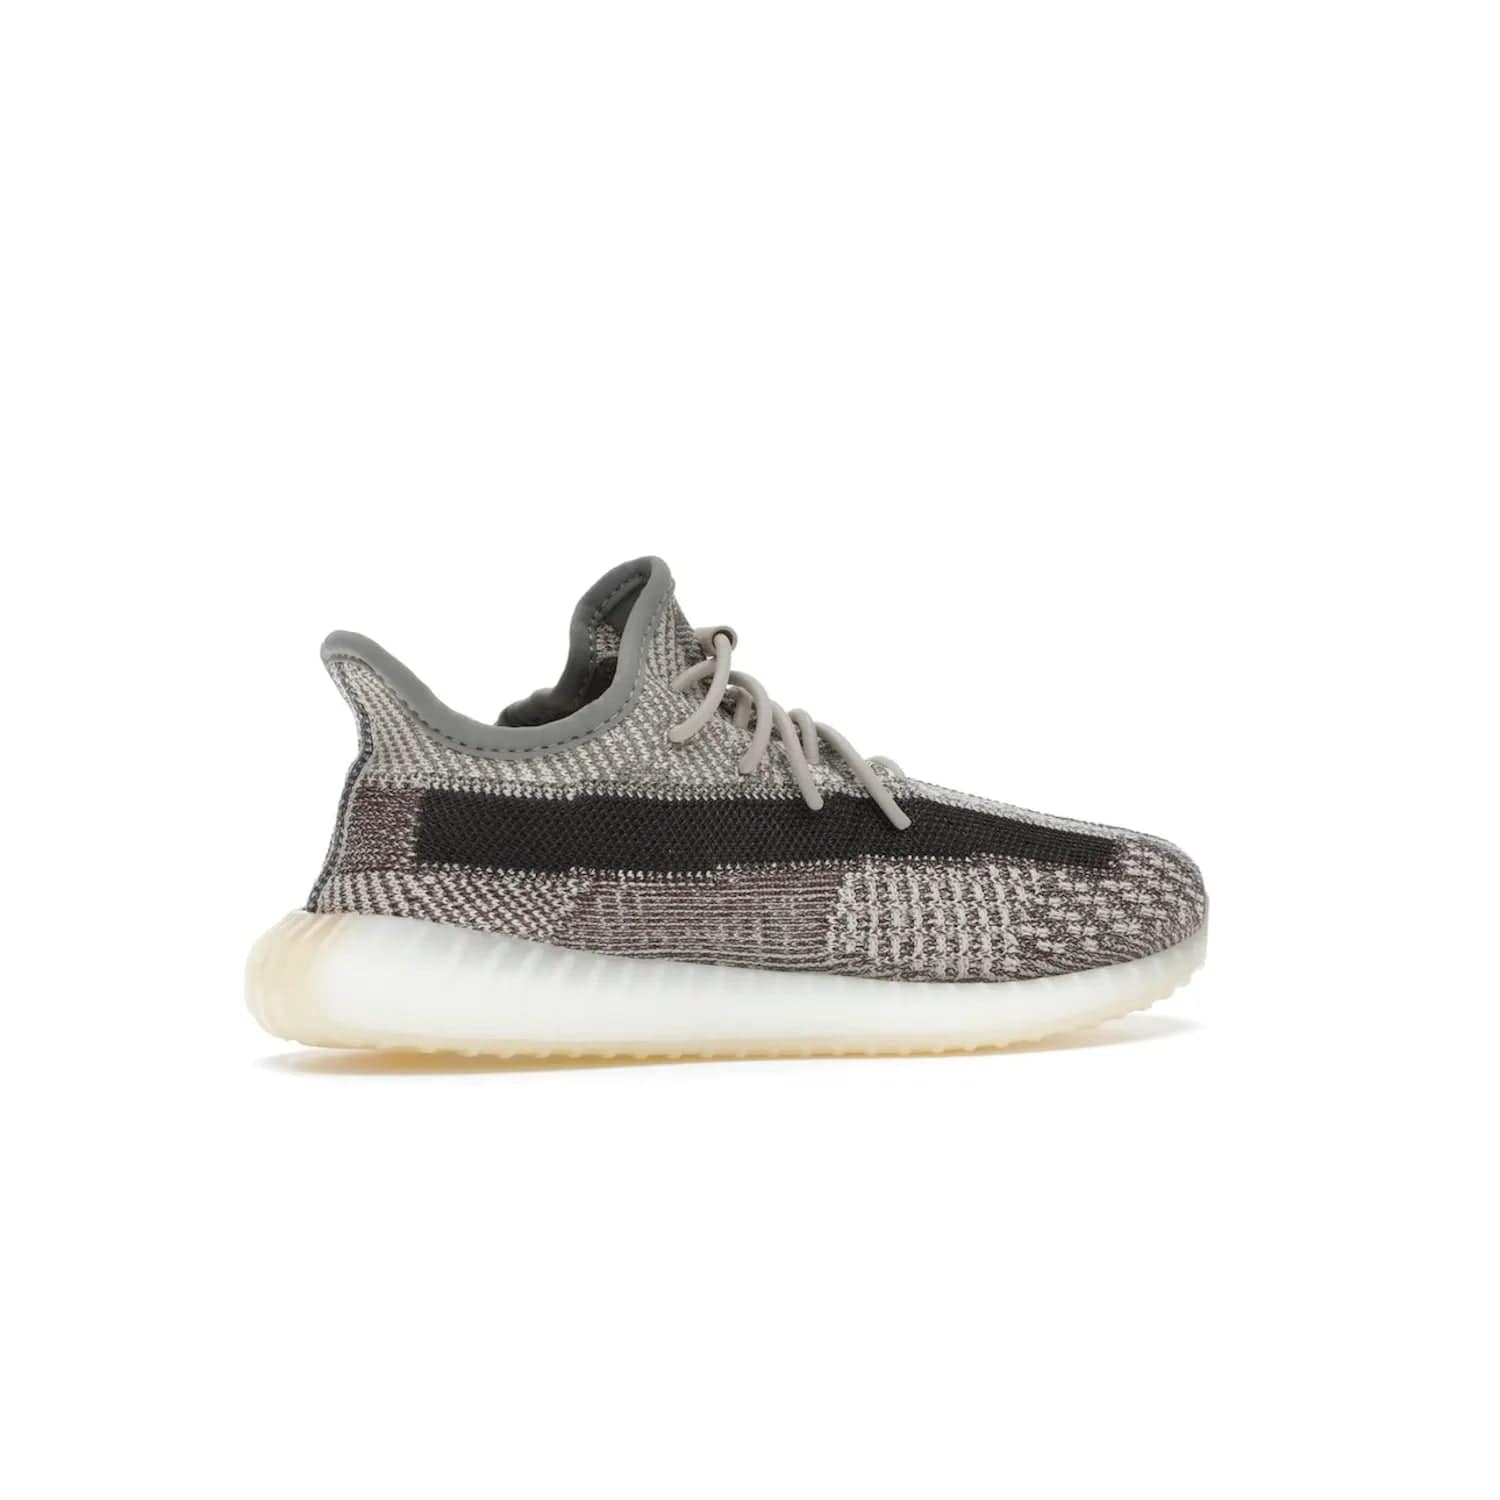 adidas Yeezy Boost 350 V2 Zyon (Kids) - Image 35 - Only at www.BallersClubKickz.com - The adidas Yeezy Boost 350 V2 Zyon (Kids) - perfect pick for fashion-savvy kids. Features soft Primeknit upper, lace closure & colorful patterning. Comfort & style for kids' summer outfits!